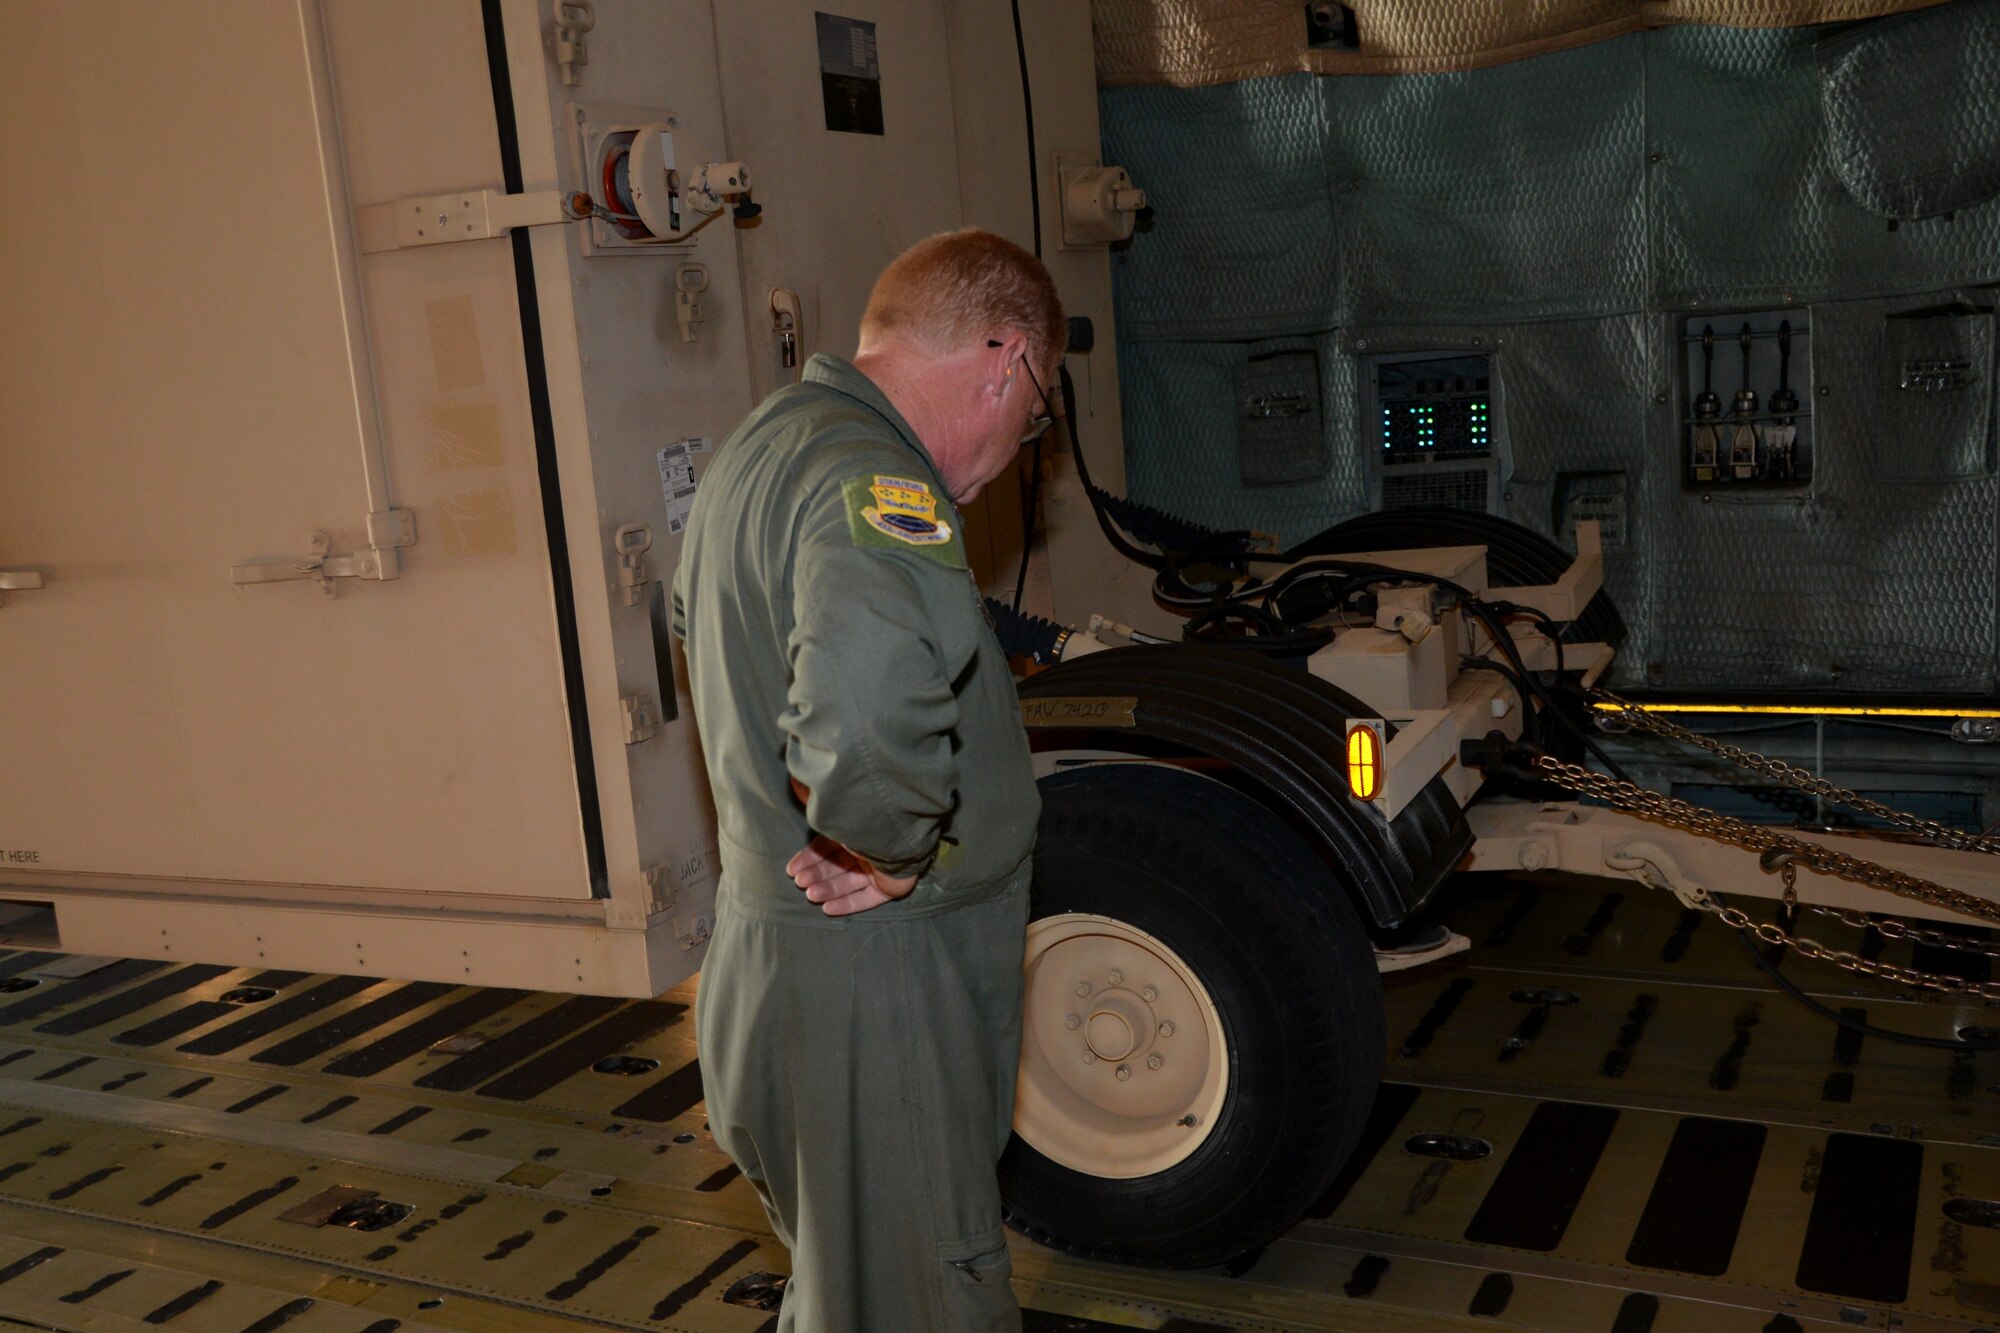 Loadmaster Senior Master Sgt. Scott Lynch, 433rd Operations Group, Joint Base San Antonio-Lackland, Texas surveys cargo that has been tied down on a C-5A Galaxy aircraft prior to take-off to Naval Air Station, North Island, Calif, 24 April, 2014, for the Patriot Hook 2014 Exercise. (U.S. Air Force photo/Senior Master Sgt. Minnie Jones)
